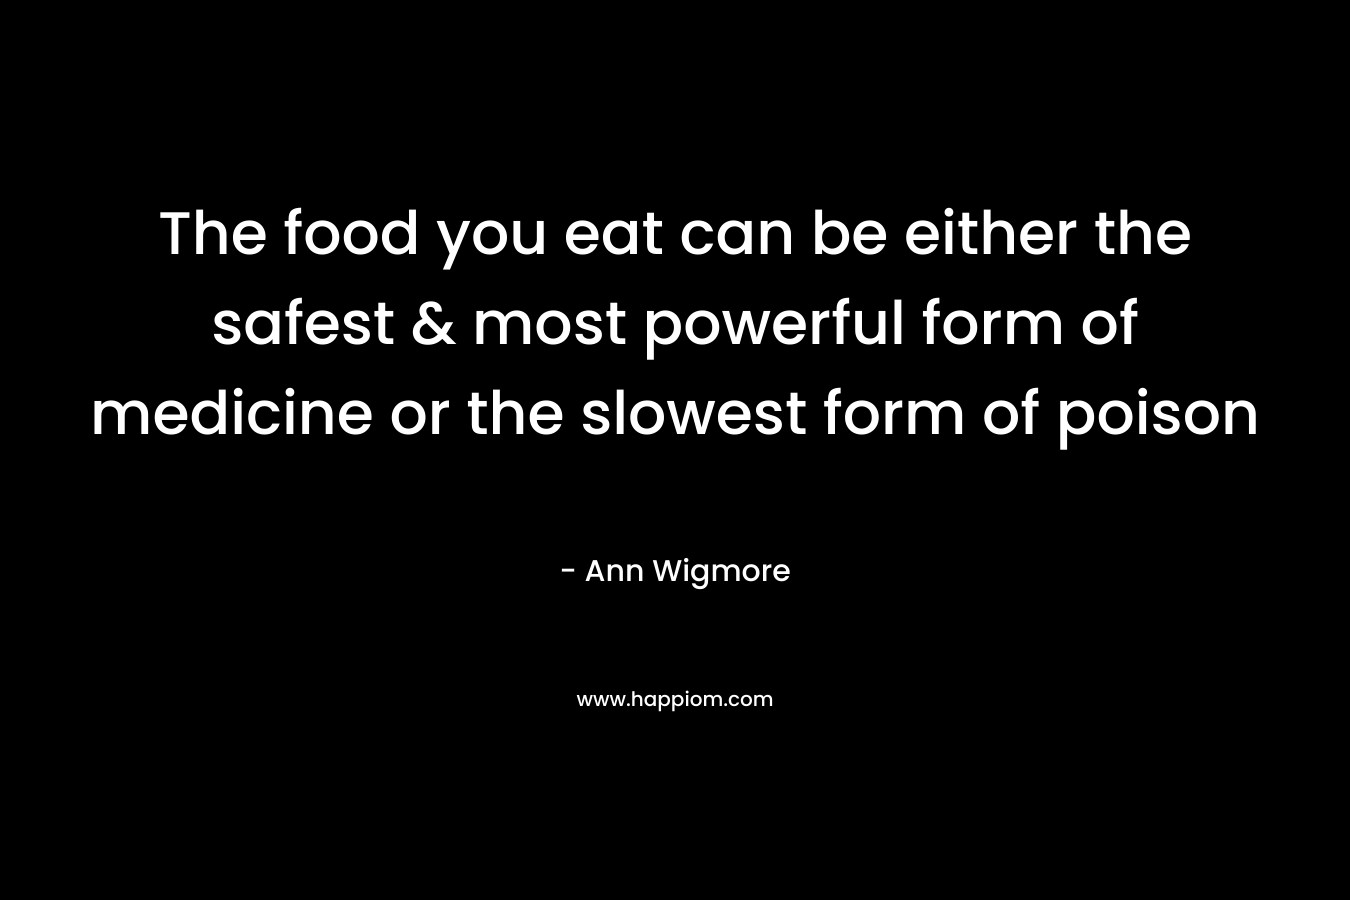 The food you eat can be either the safest & most powerful form of medicine or the slowest form of poison – Ann Wigmore